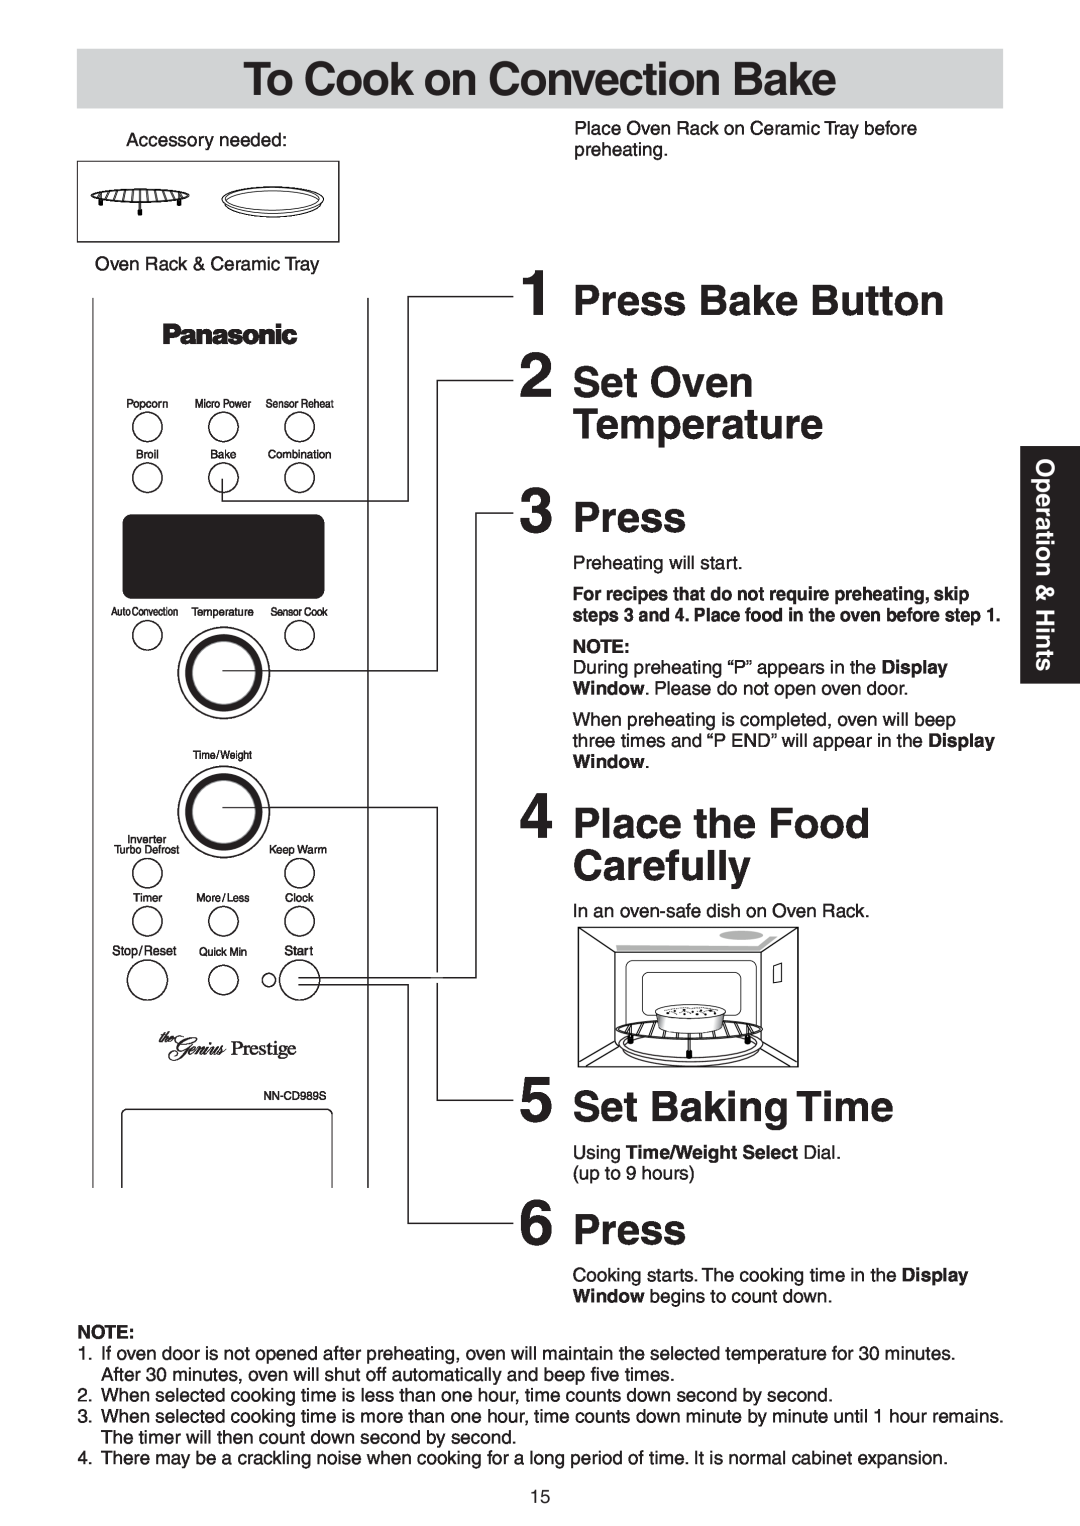 Panasonic NN-CD989S To Cook on Convection Bake, Press Bake Button 2 Set Oven Temperature 3 Press, Place the Food Carefully 